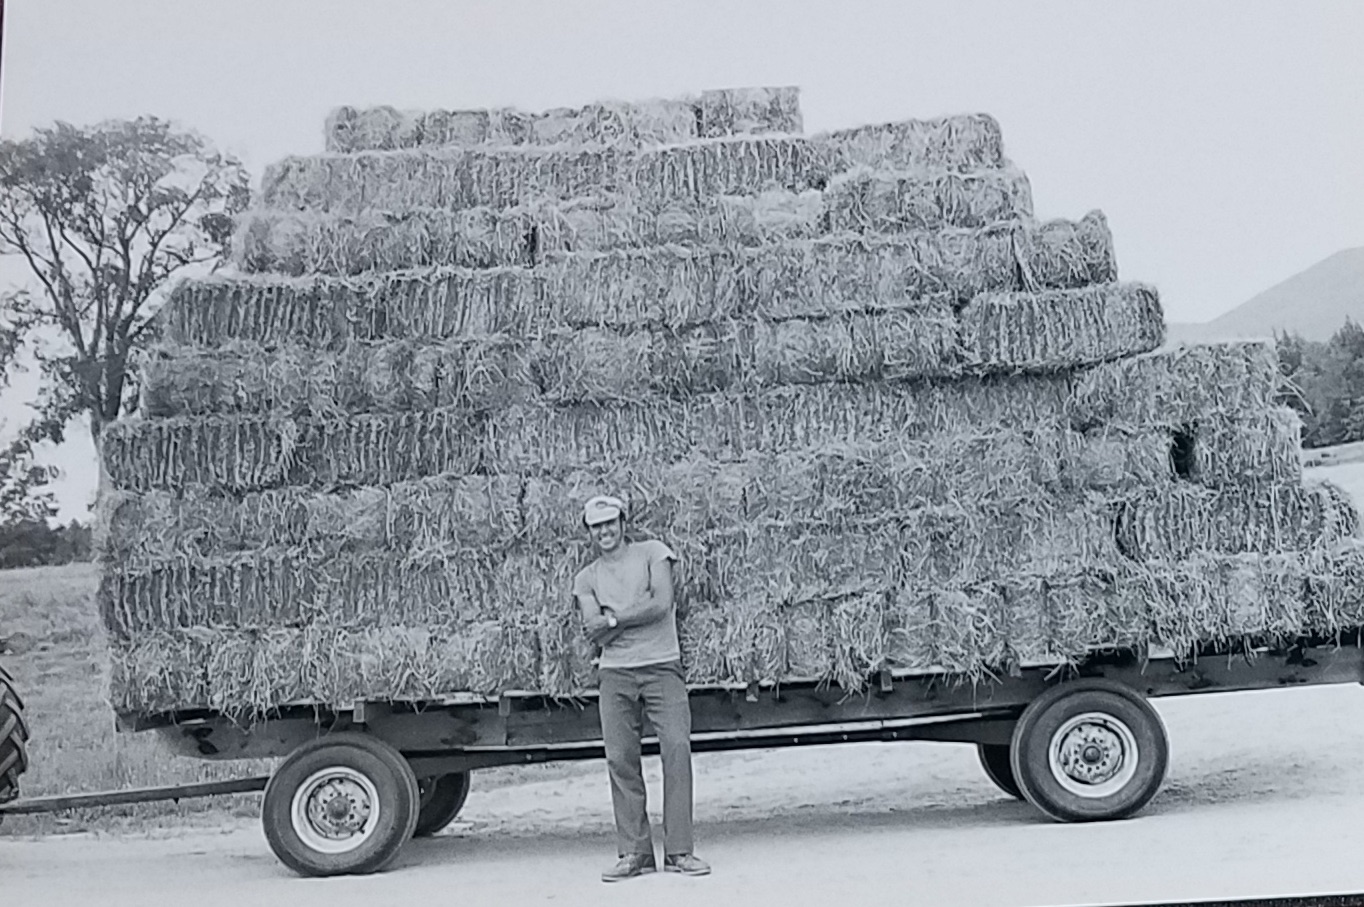 truck loaded & overflowing with hay - took George & brother Steve 20 minutes!